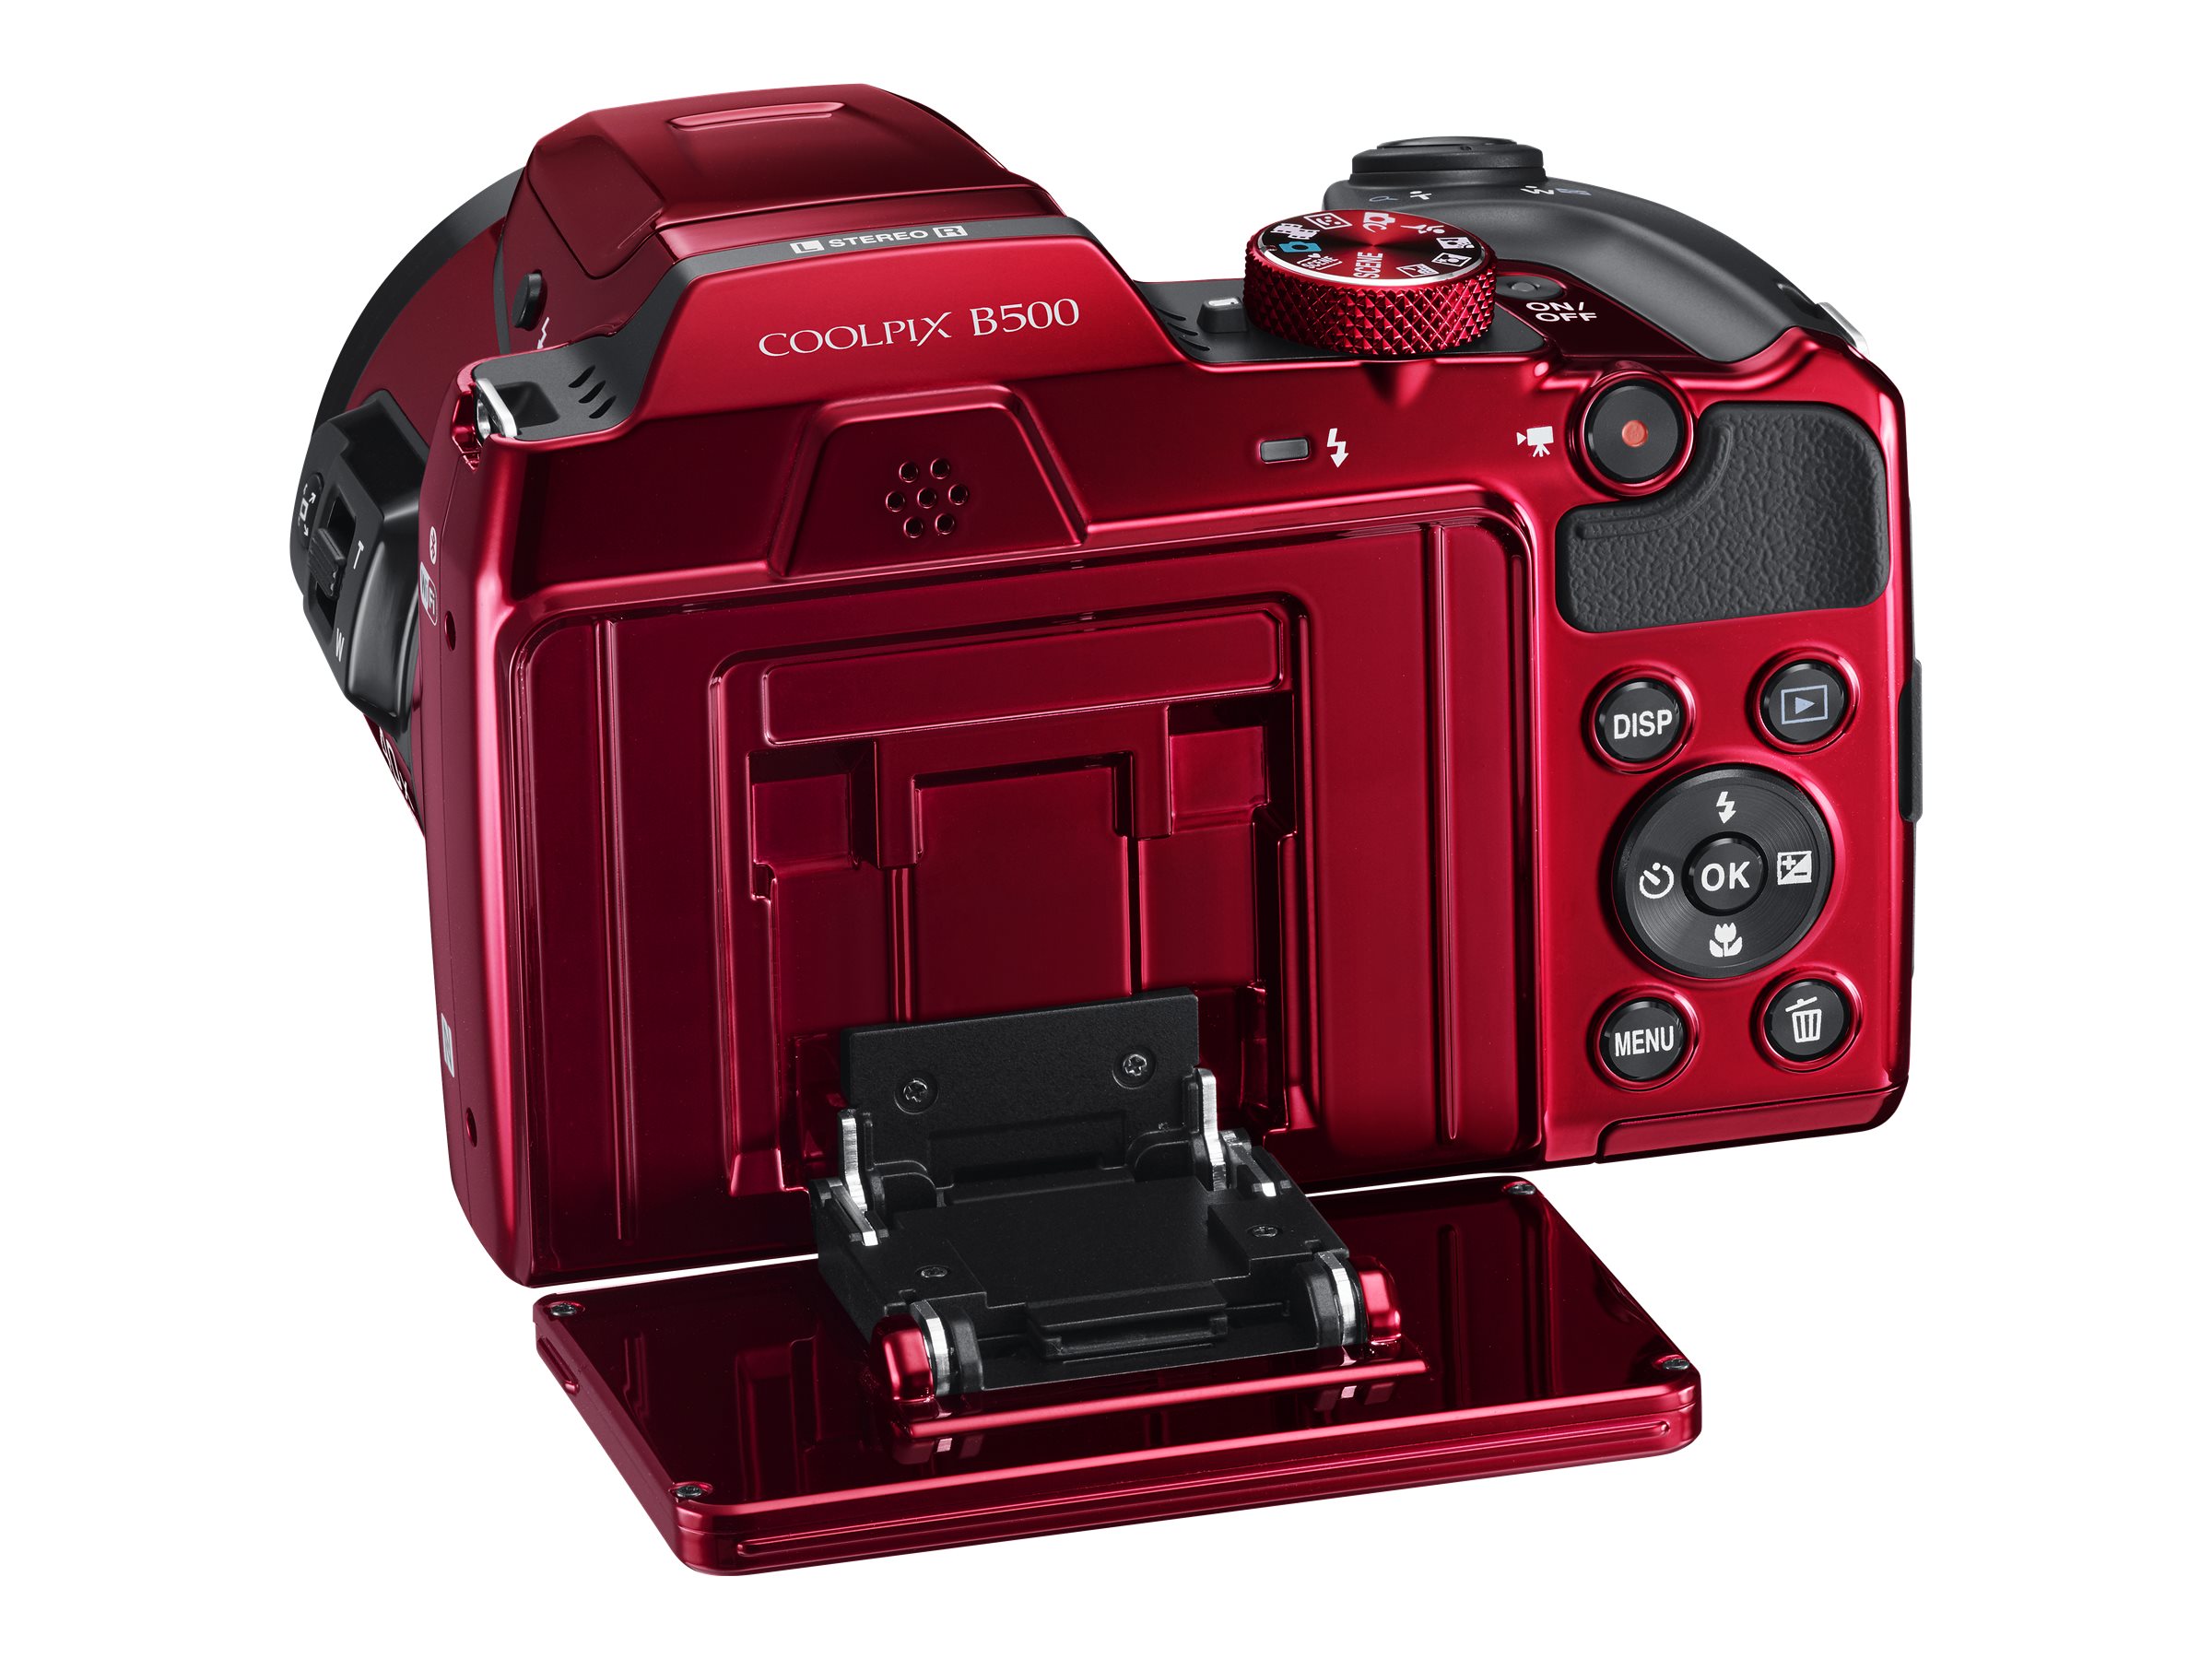 Nikon Red COOLPIX B500 Digital Camera with 16 Megapixels and 40x Optical Zoom - image 9 of 11